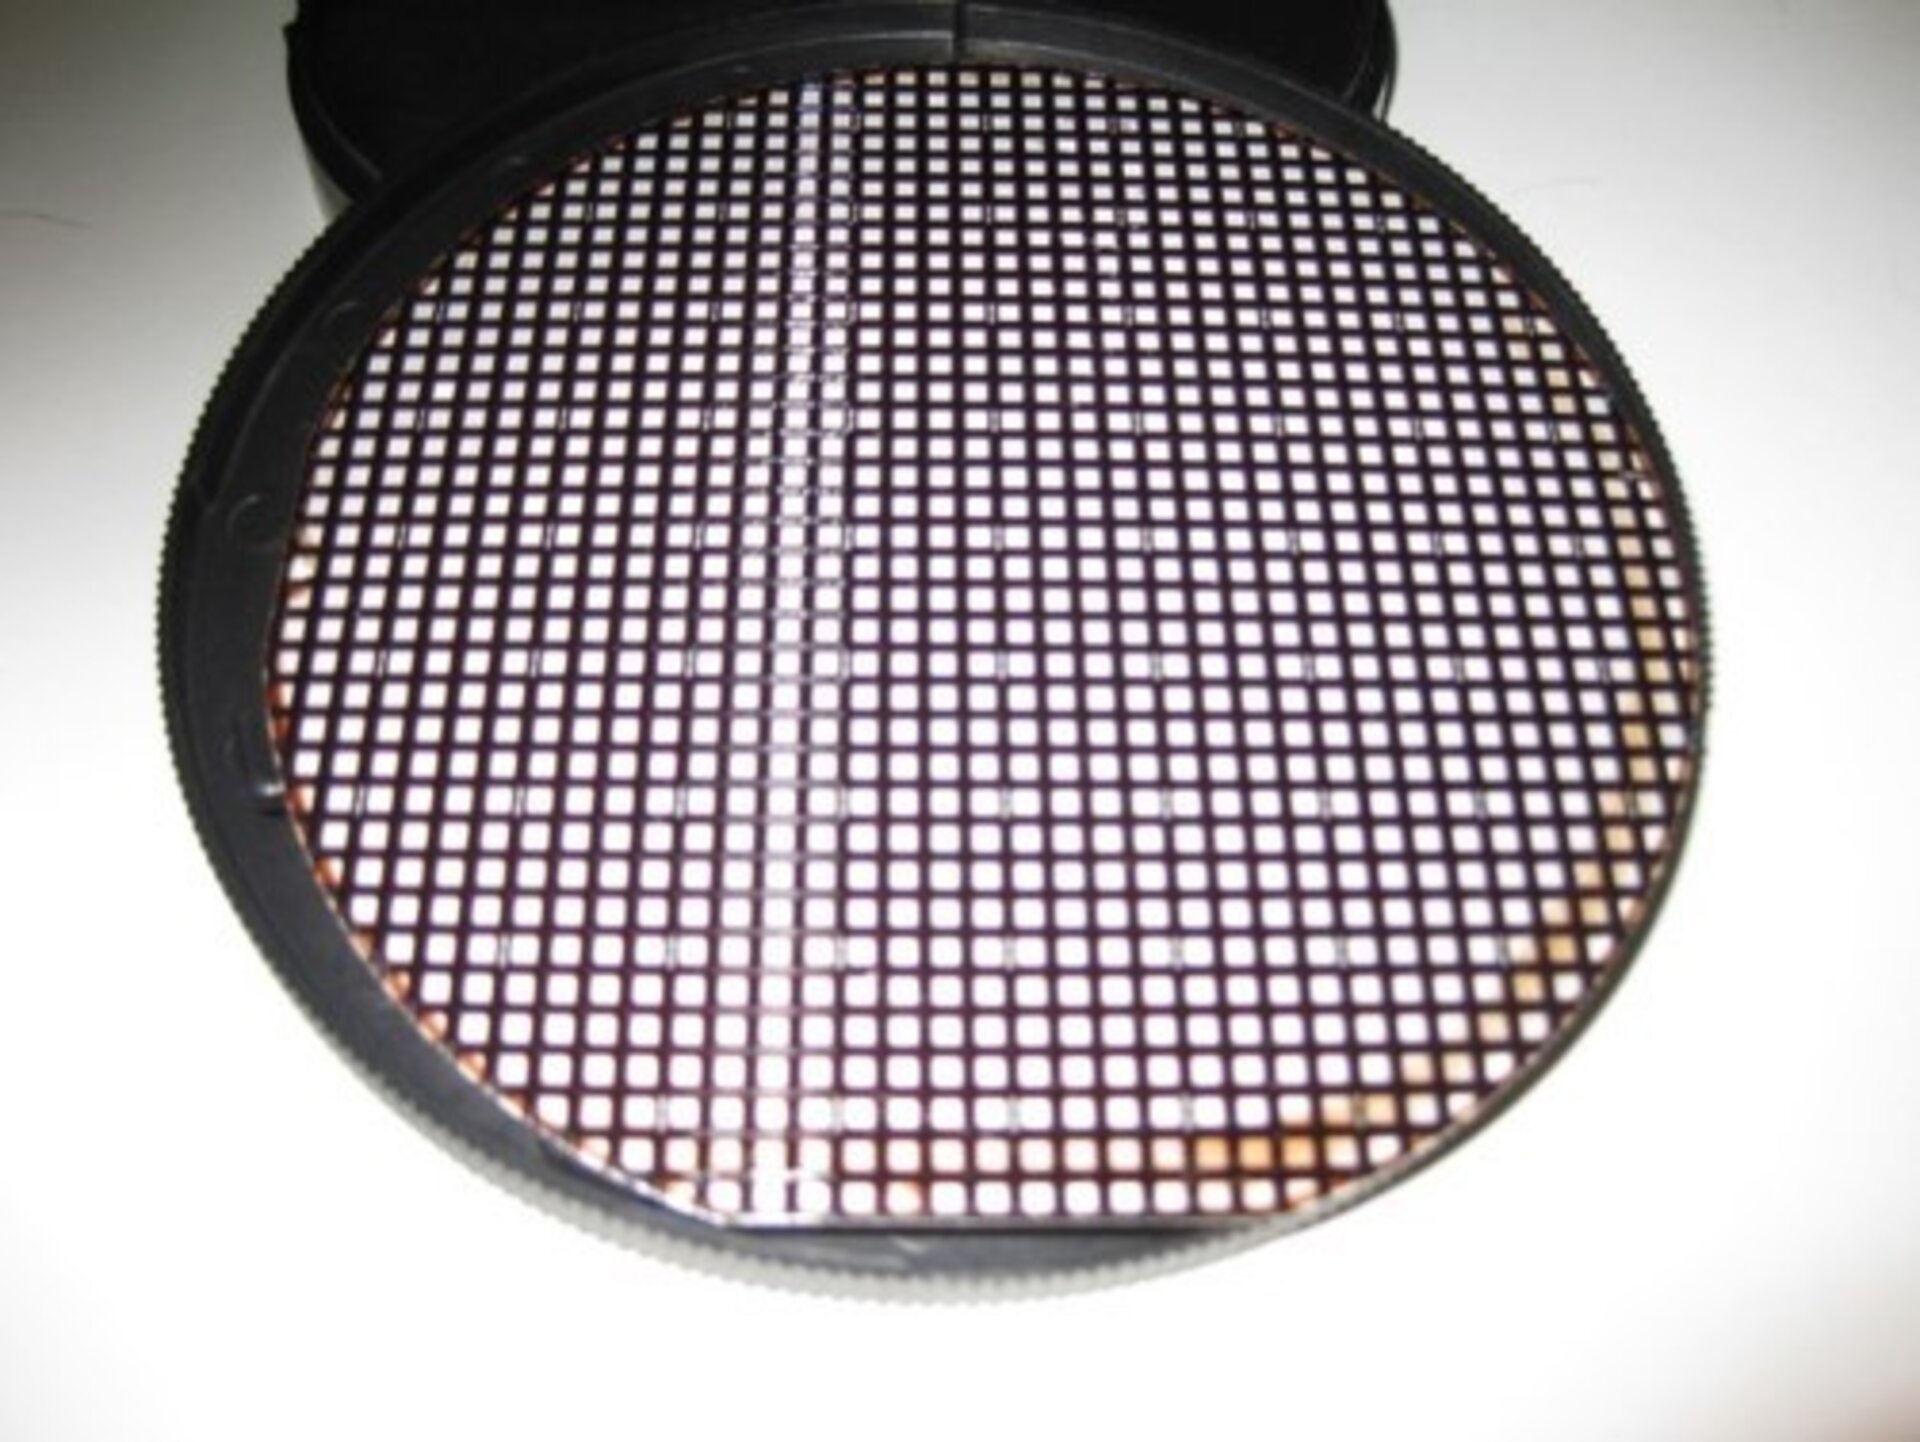 Wafer of the developed SiC JBS diode